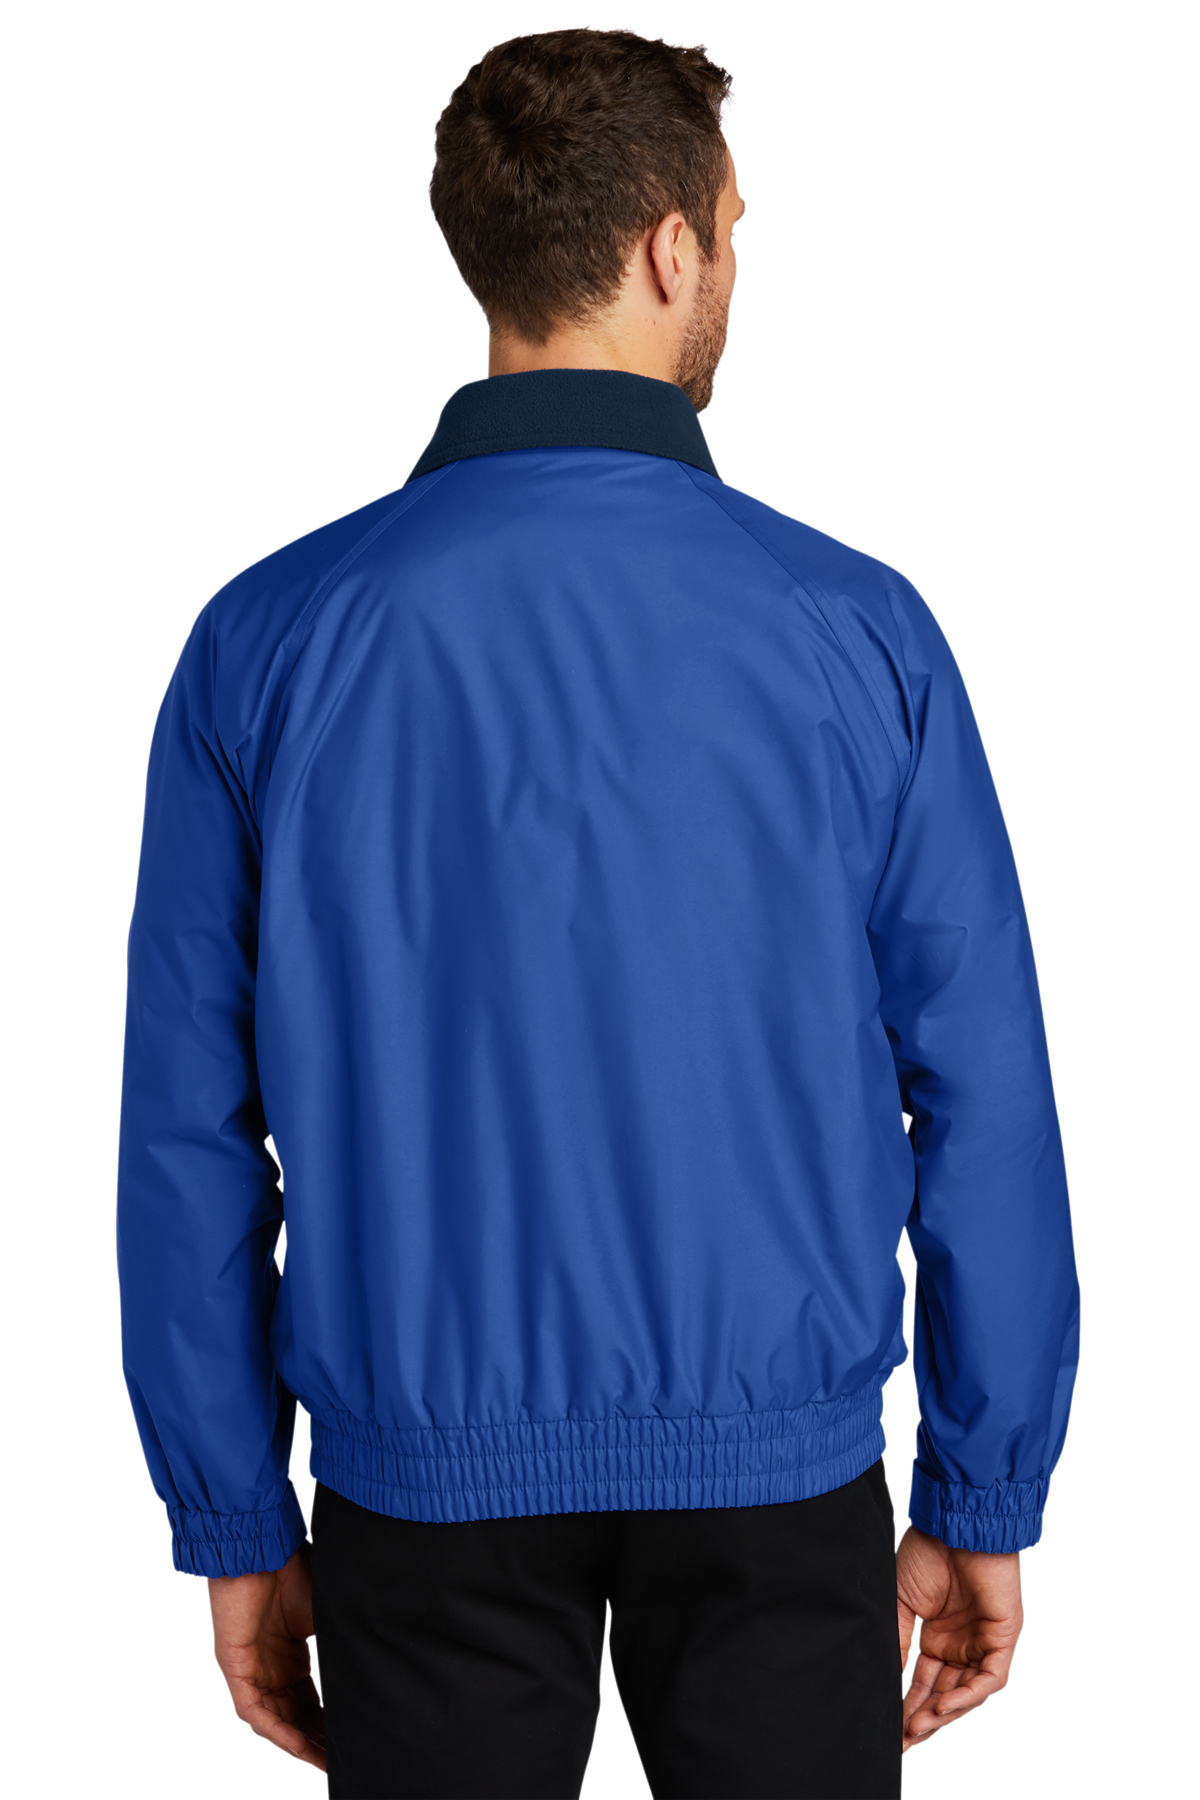 Port Authority Competitor™ Jacket | Product | SanMar